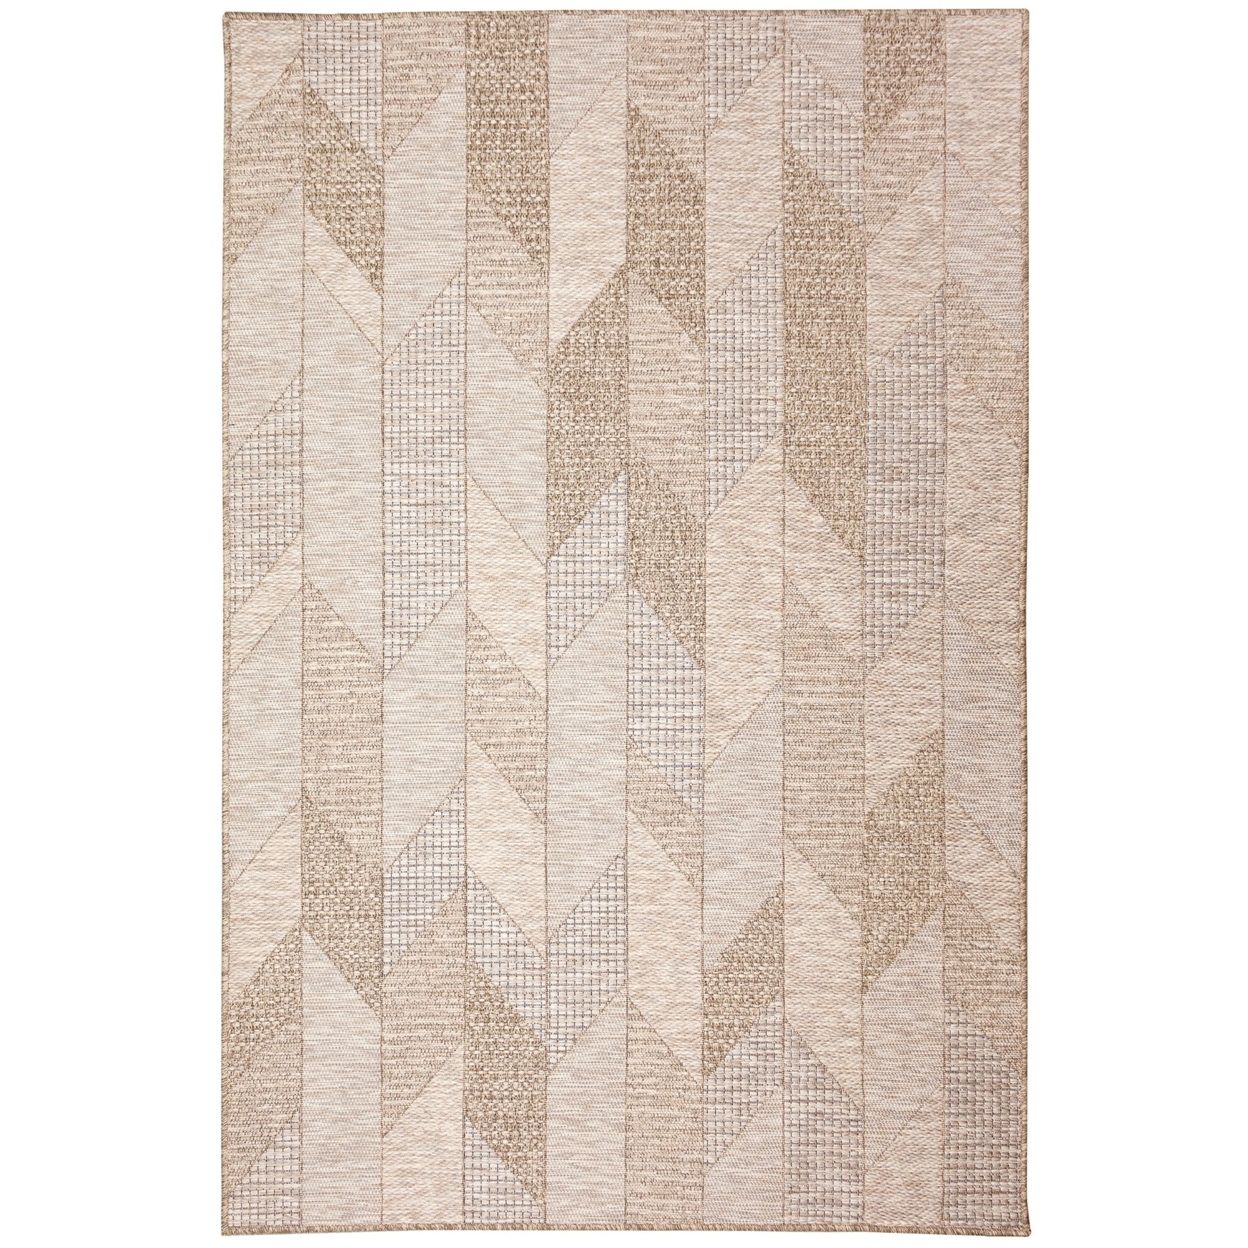 Liora Manne Orly Angles Indoor Outdoor Area Rug Natural - 7'10 X 9'10